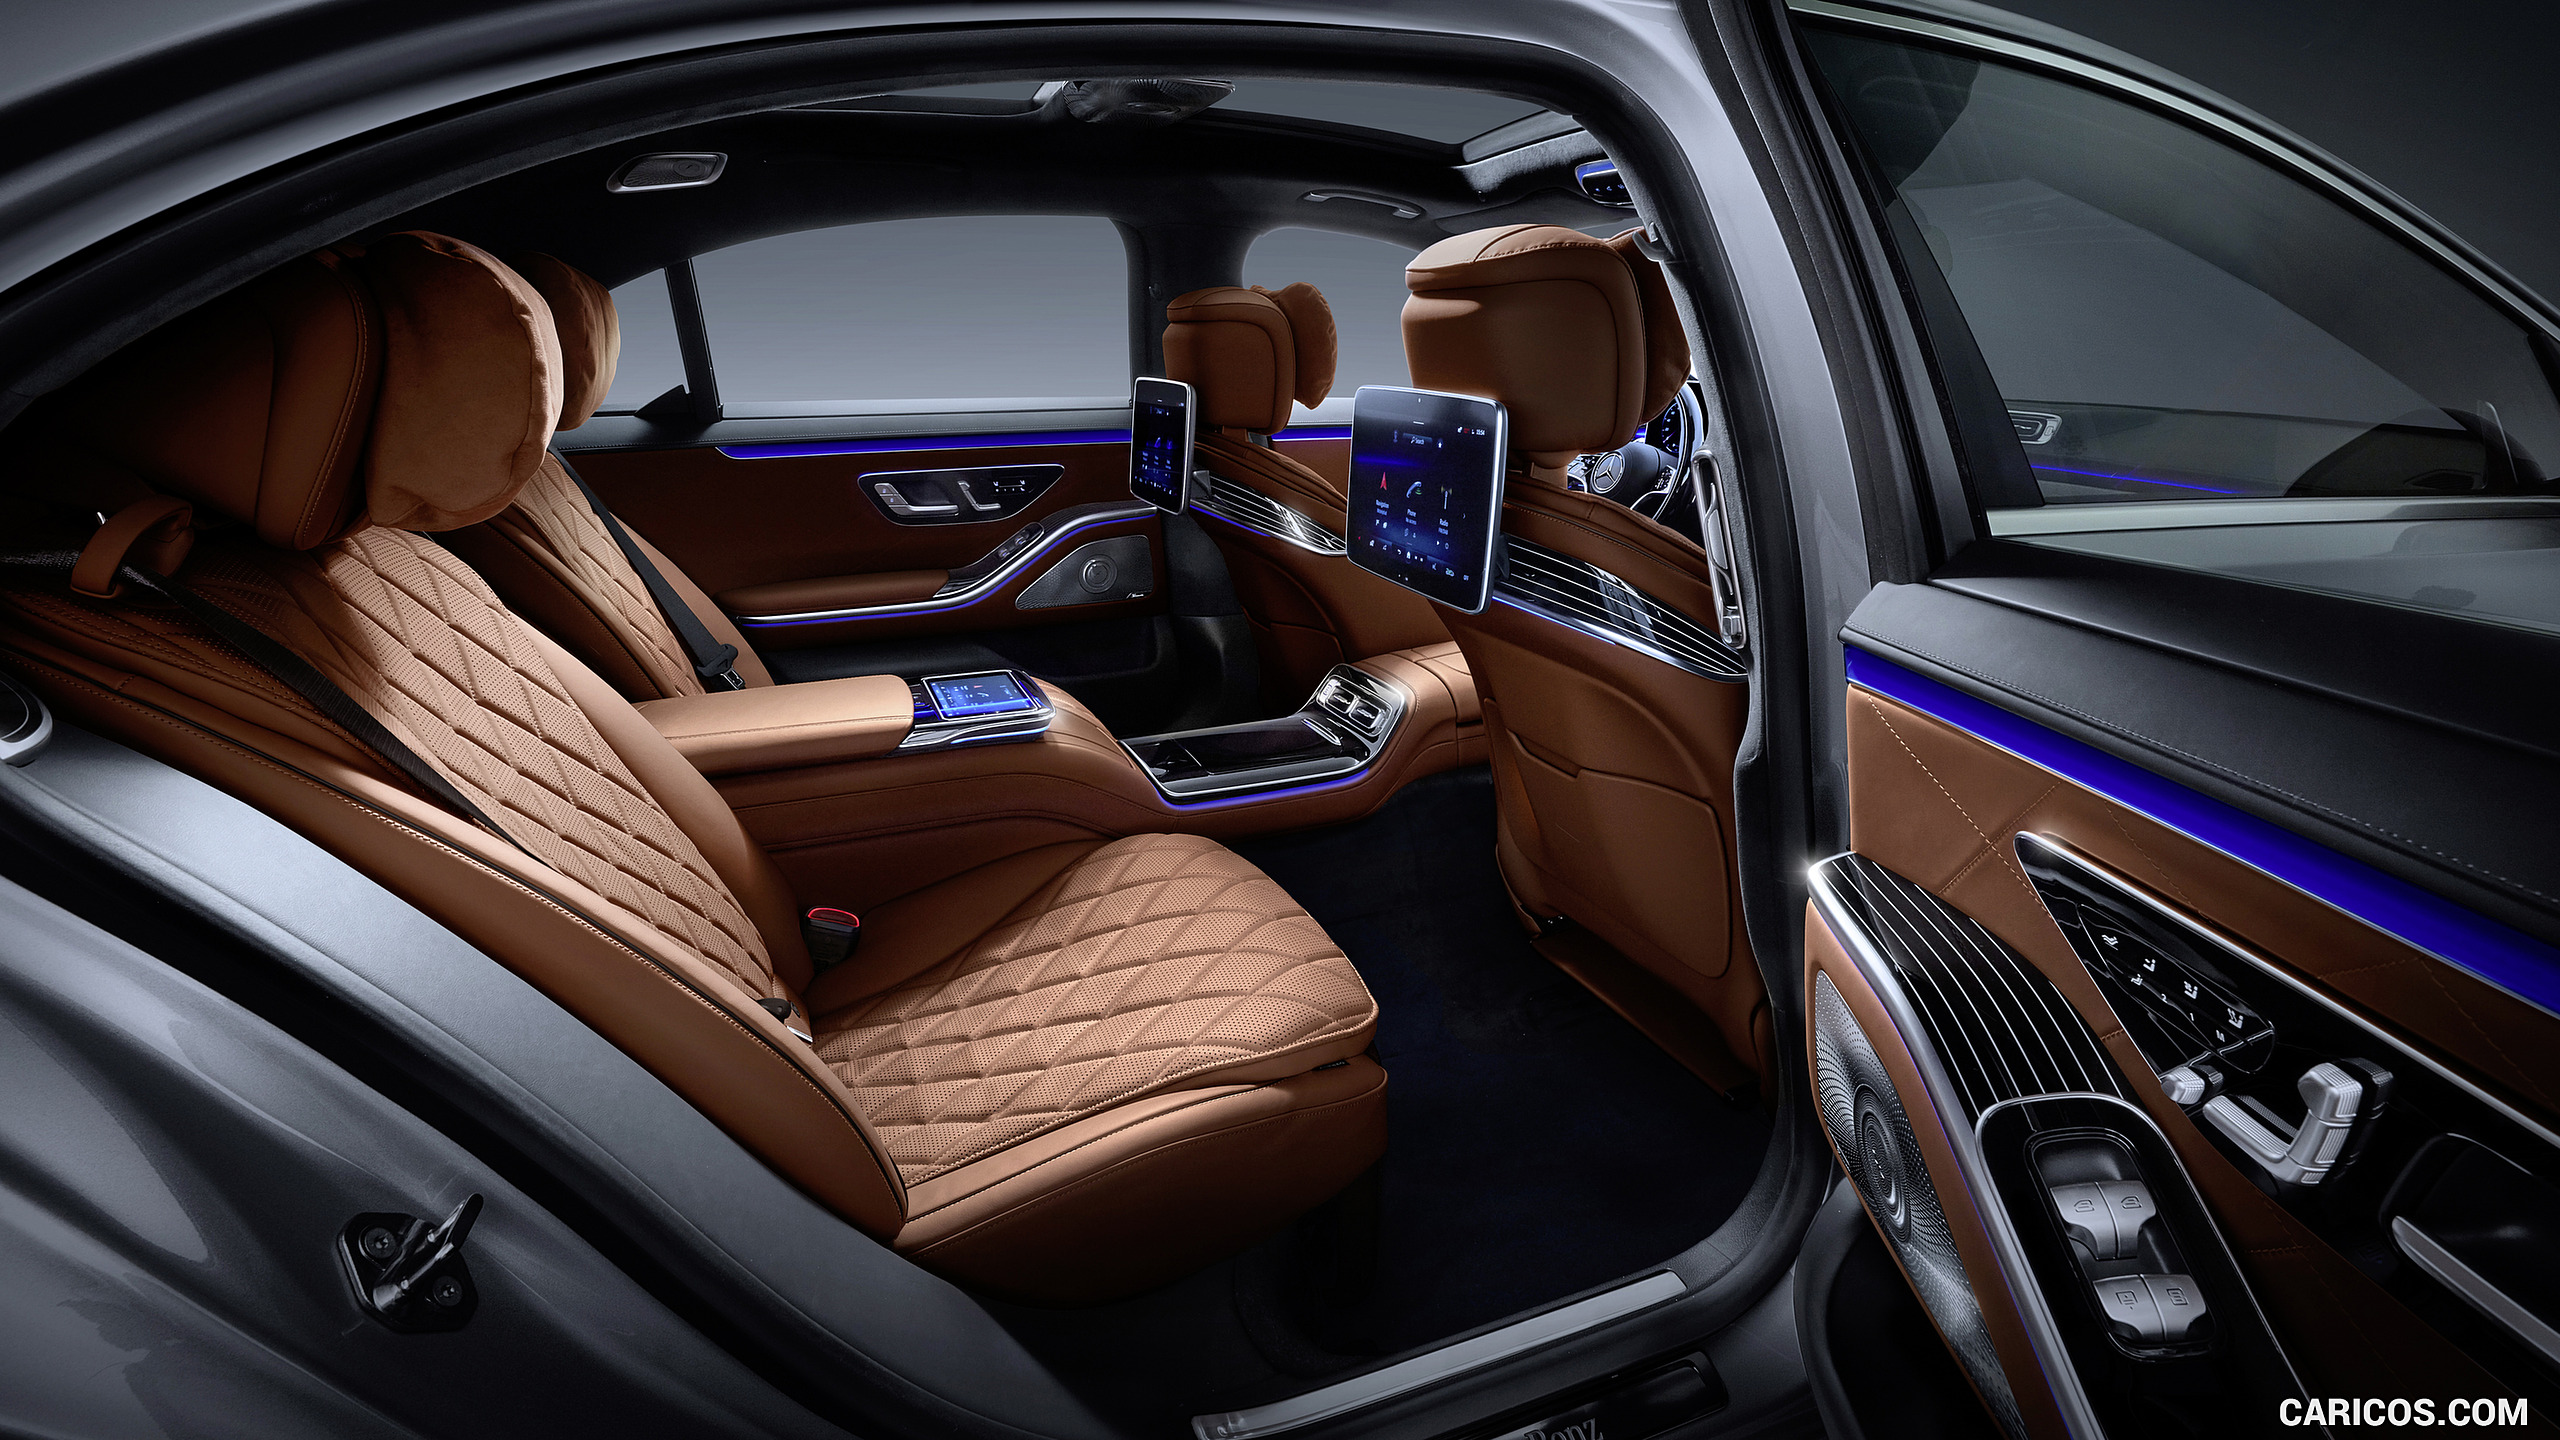 2021 Mercedes-Benz S-Class (Color: Leather Siena Brown) - Interior, Rear Seats, #139 of 316